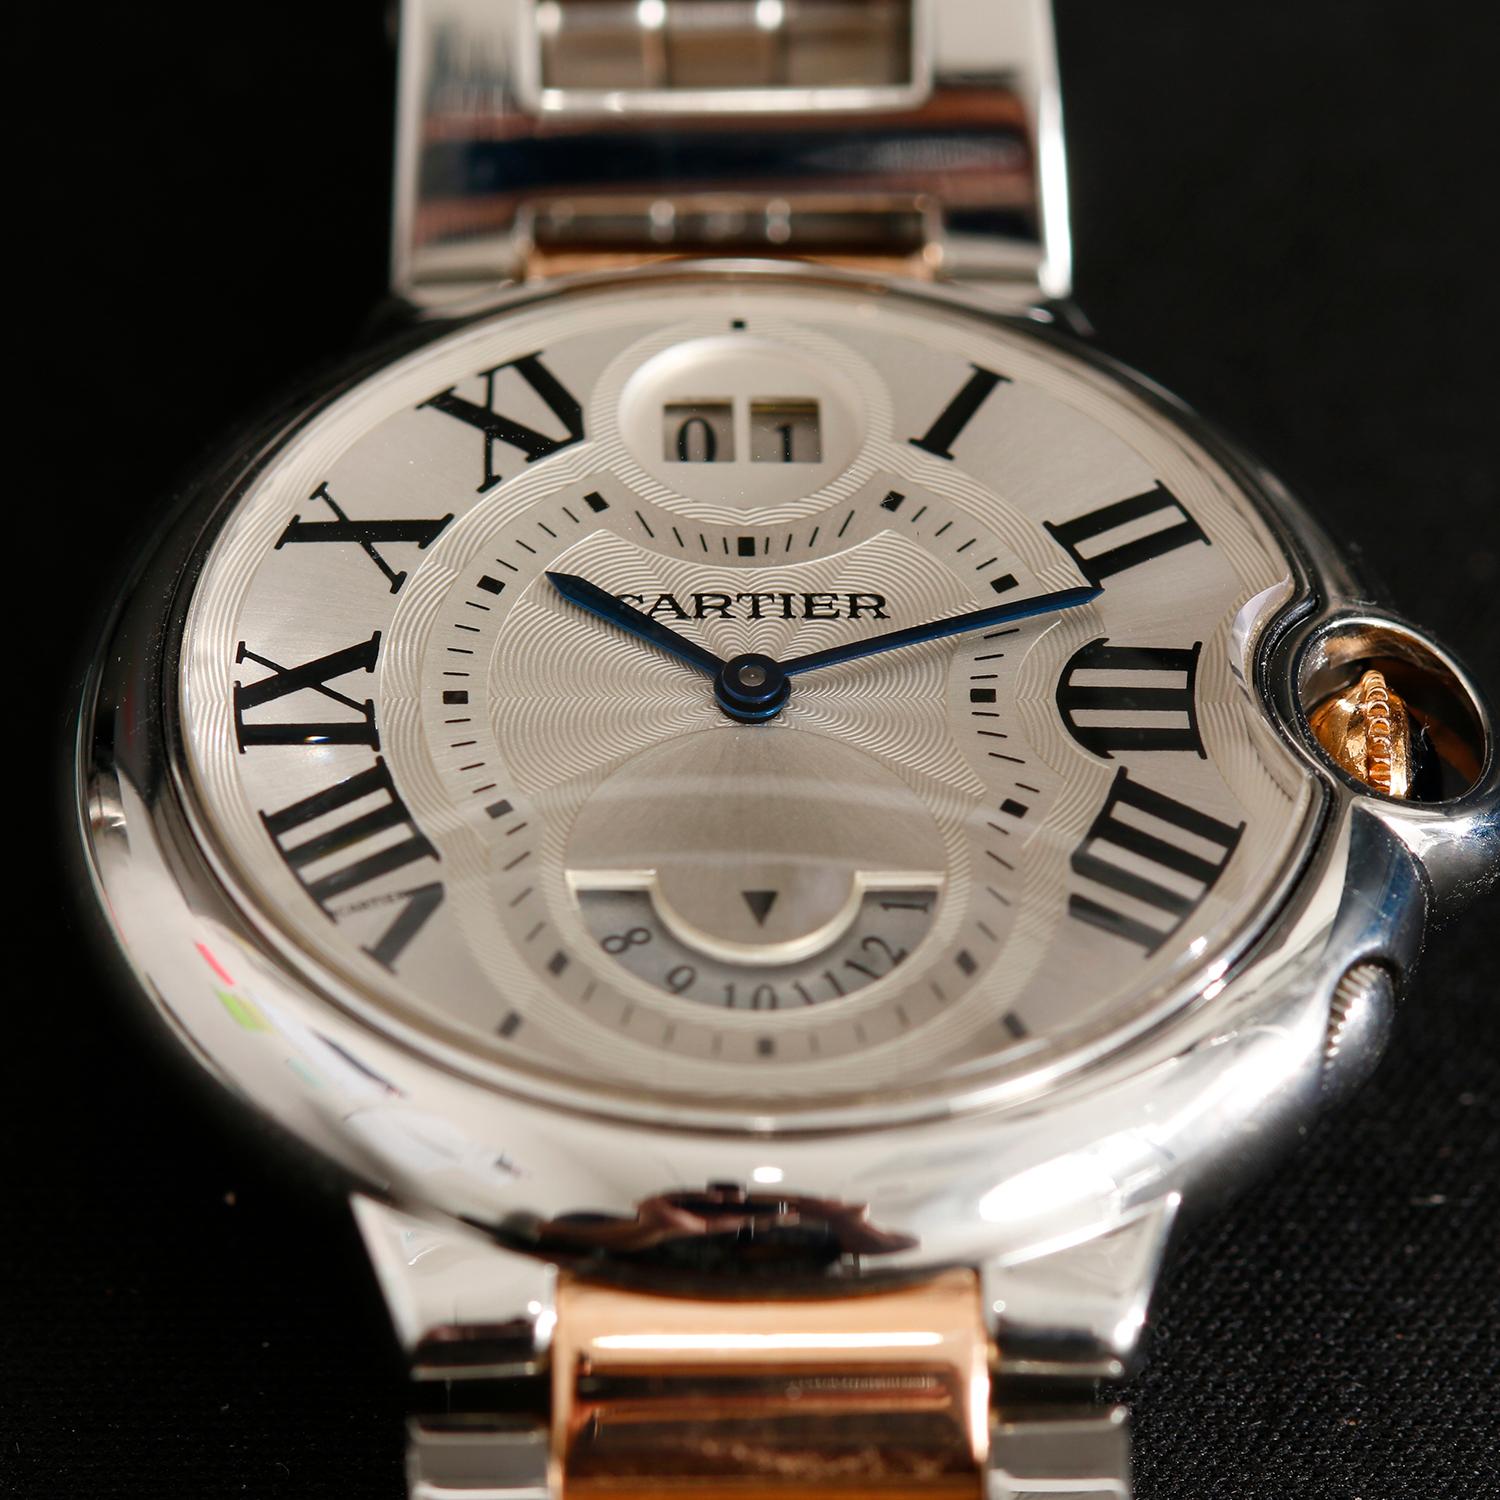 Cartier Ballon Bleu Two Timezone Rose Gold & Stainless Steel Watch W6920027 For Sale 1